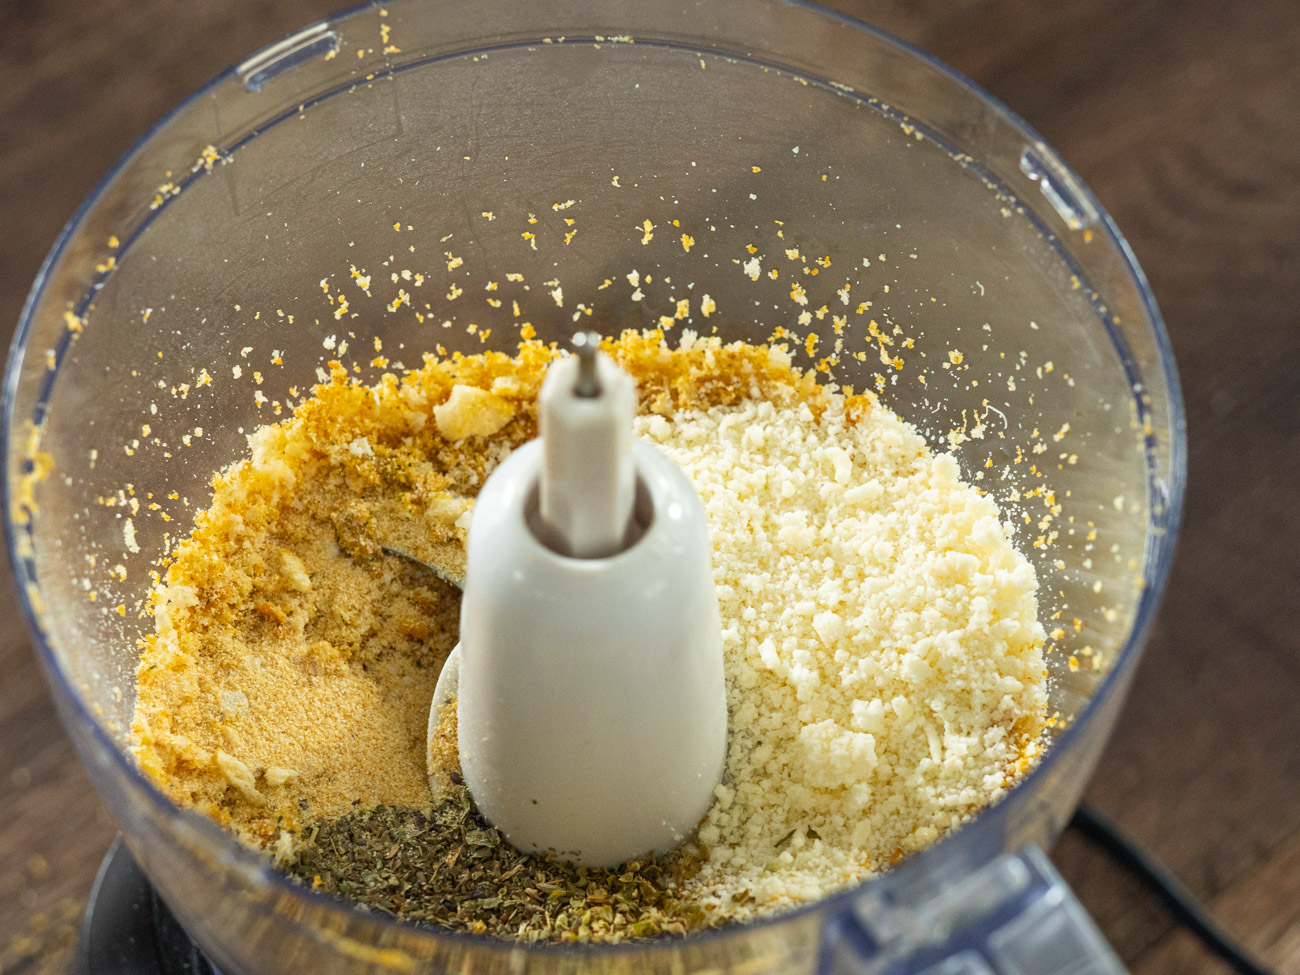 Place croutons in a food processor and pulse until crumbled. Add oregano, basil, garlic powder, onion powder, and 1/4 cup Parmesan. Pulse to mix. Pour into a shallow bowl.